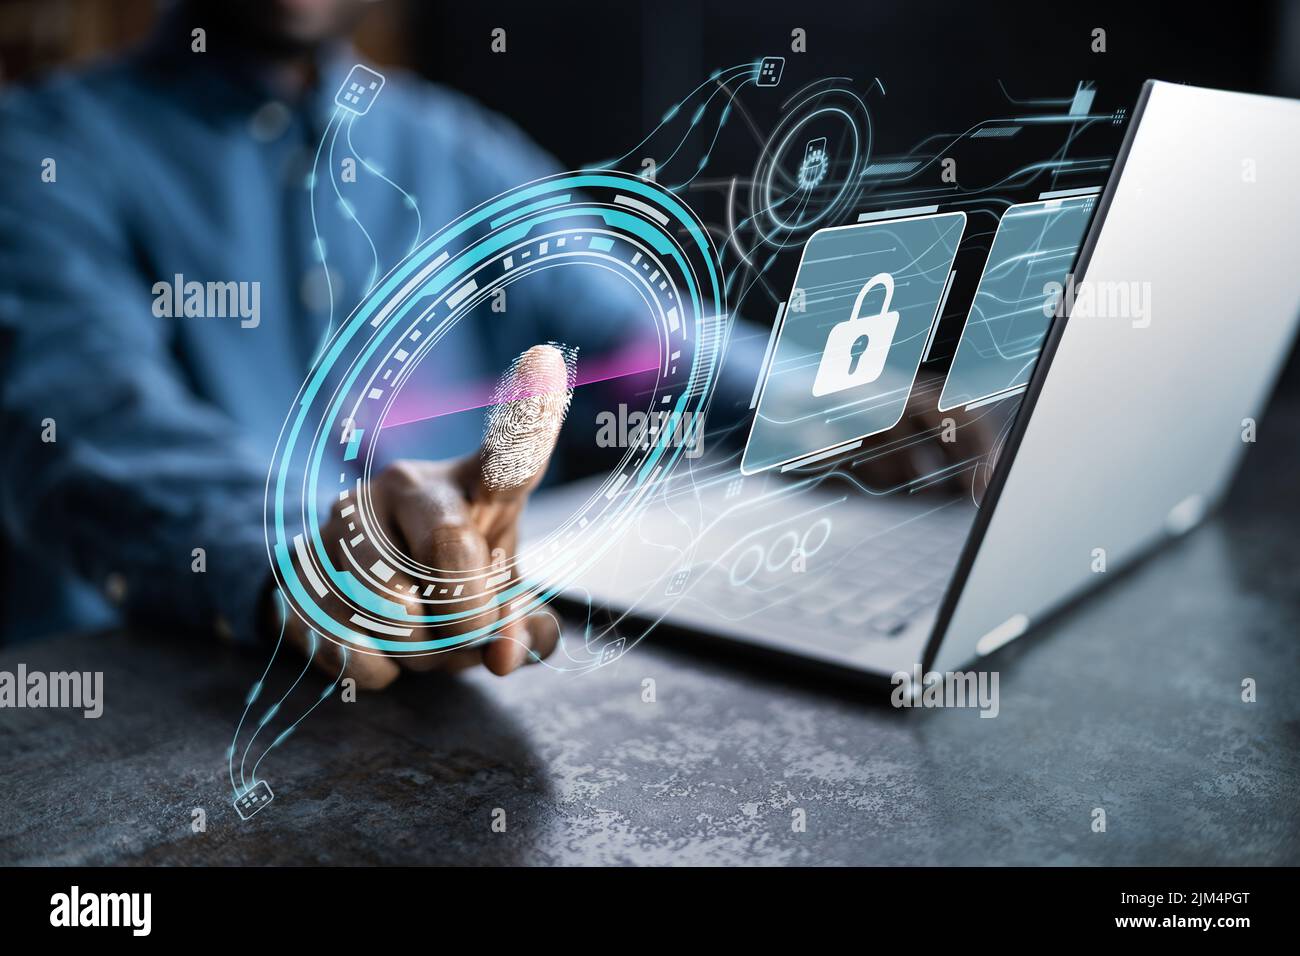 Information Technology Access Security. Business Network Touch Stock Photo